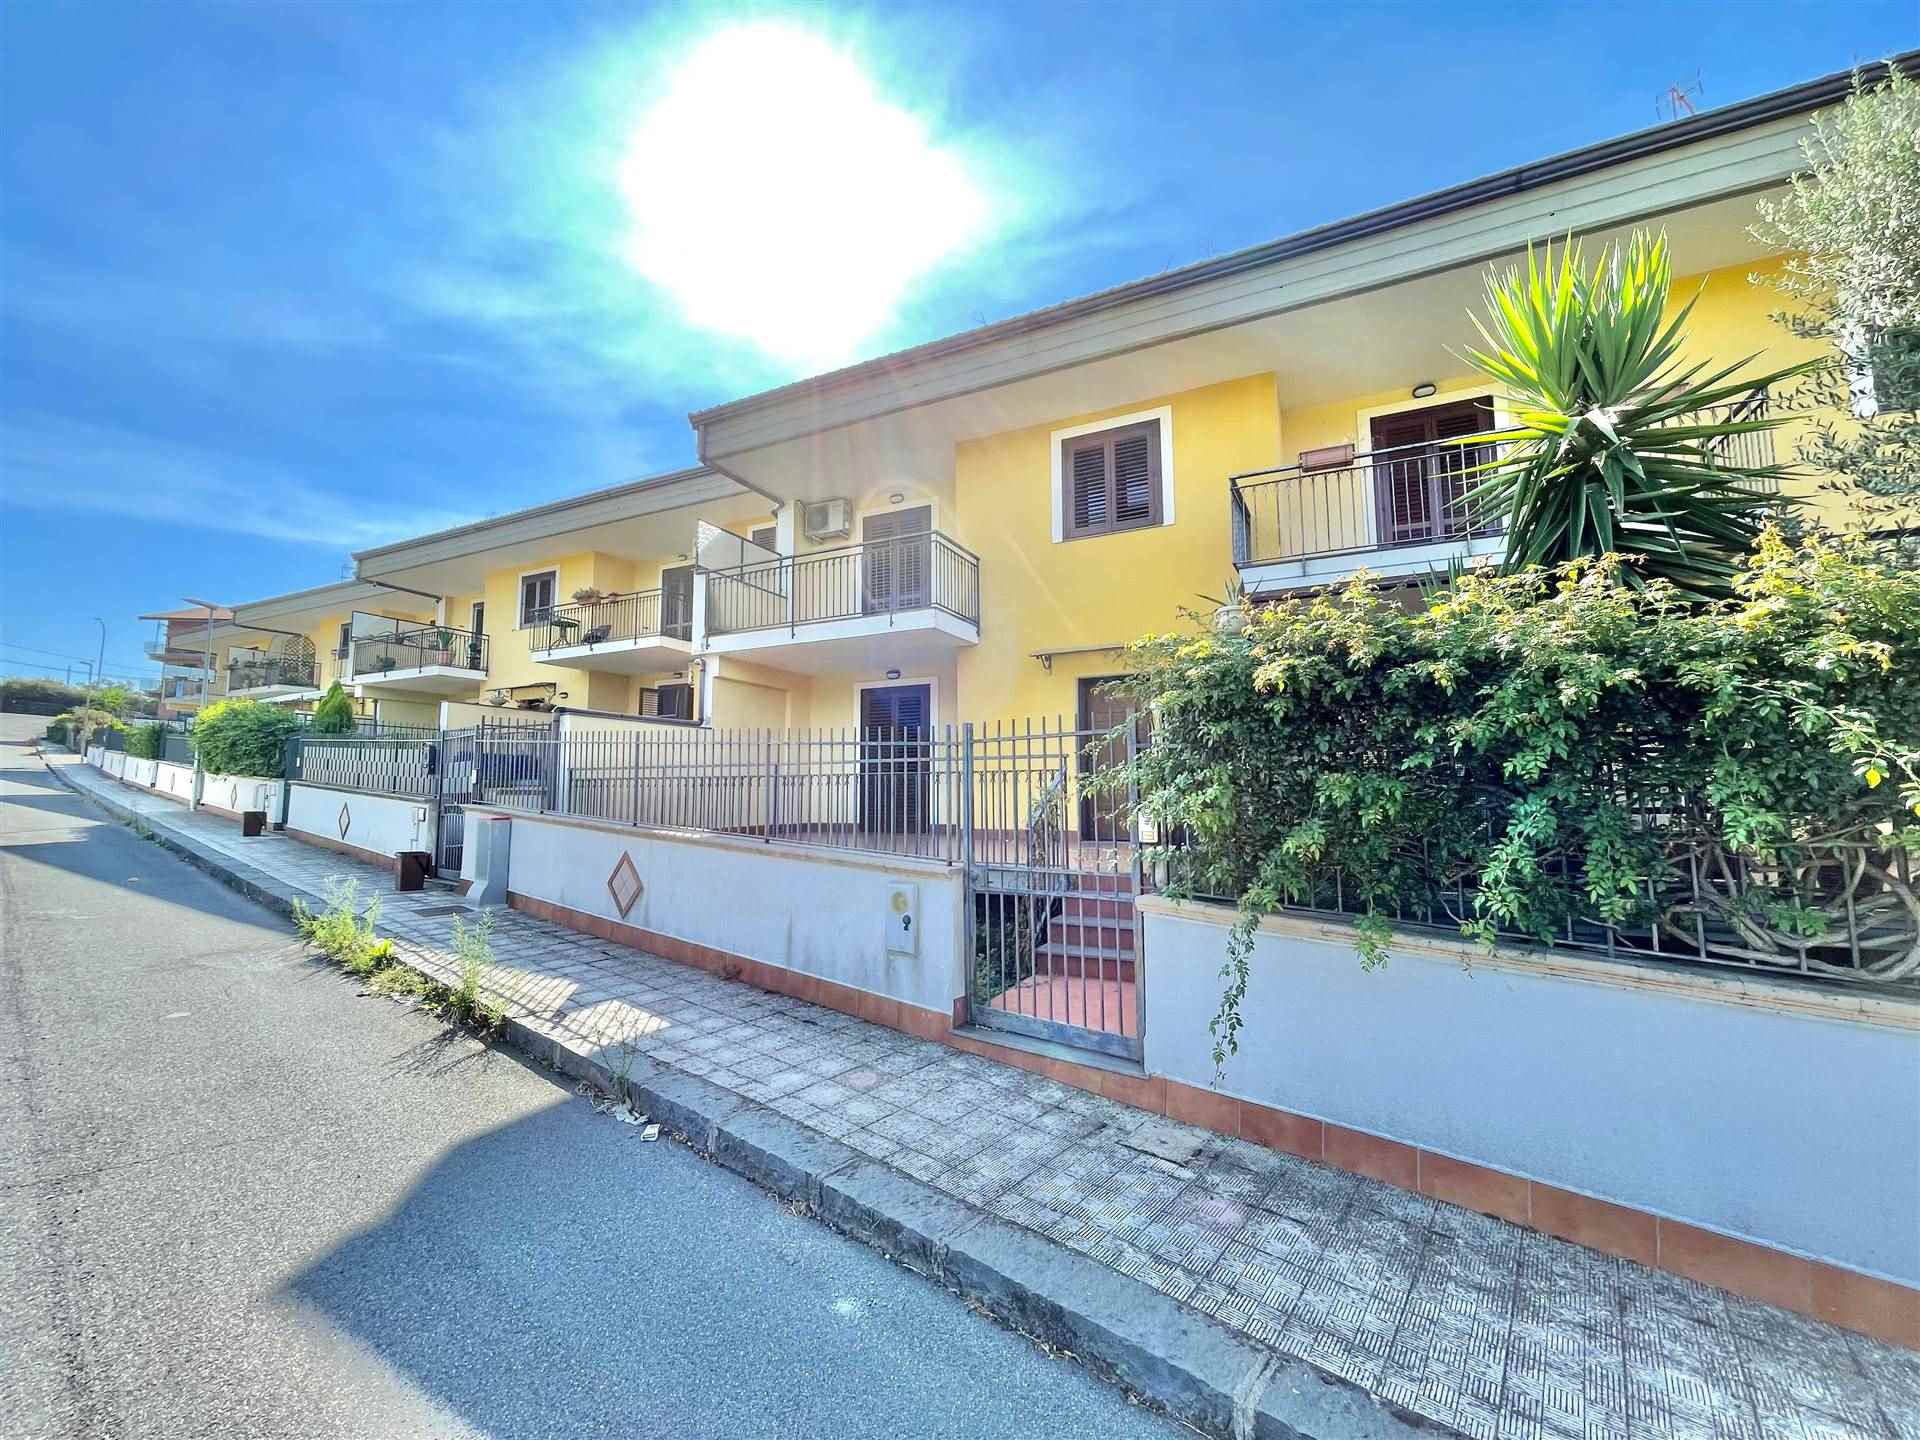 BELPASSO, Terraced villa for sale of 242 Sq. mt., Almost new, Heating Individual heating system, Energetic class: E, placed at Ground on 4, composed by: 8 Rooms, Separate kitchen, , 6 Bedrooms, 3 